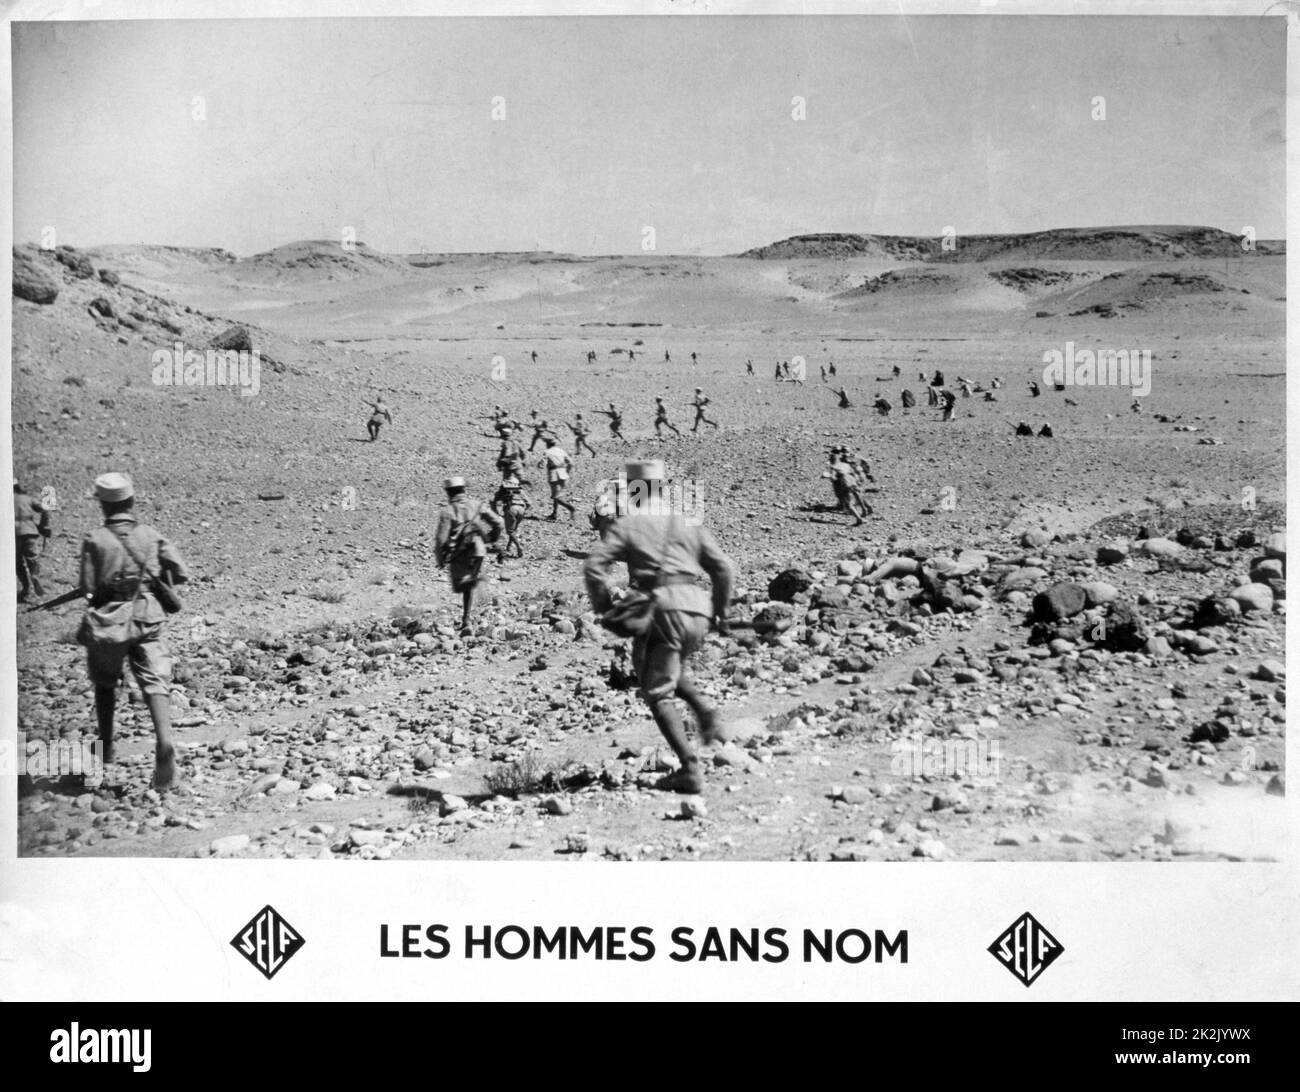 'Les Hommes sans nom' (The Men Without Names):  Early 20th century postcard of members of the French Foreign Legion in action. Stock Photo